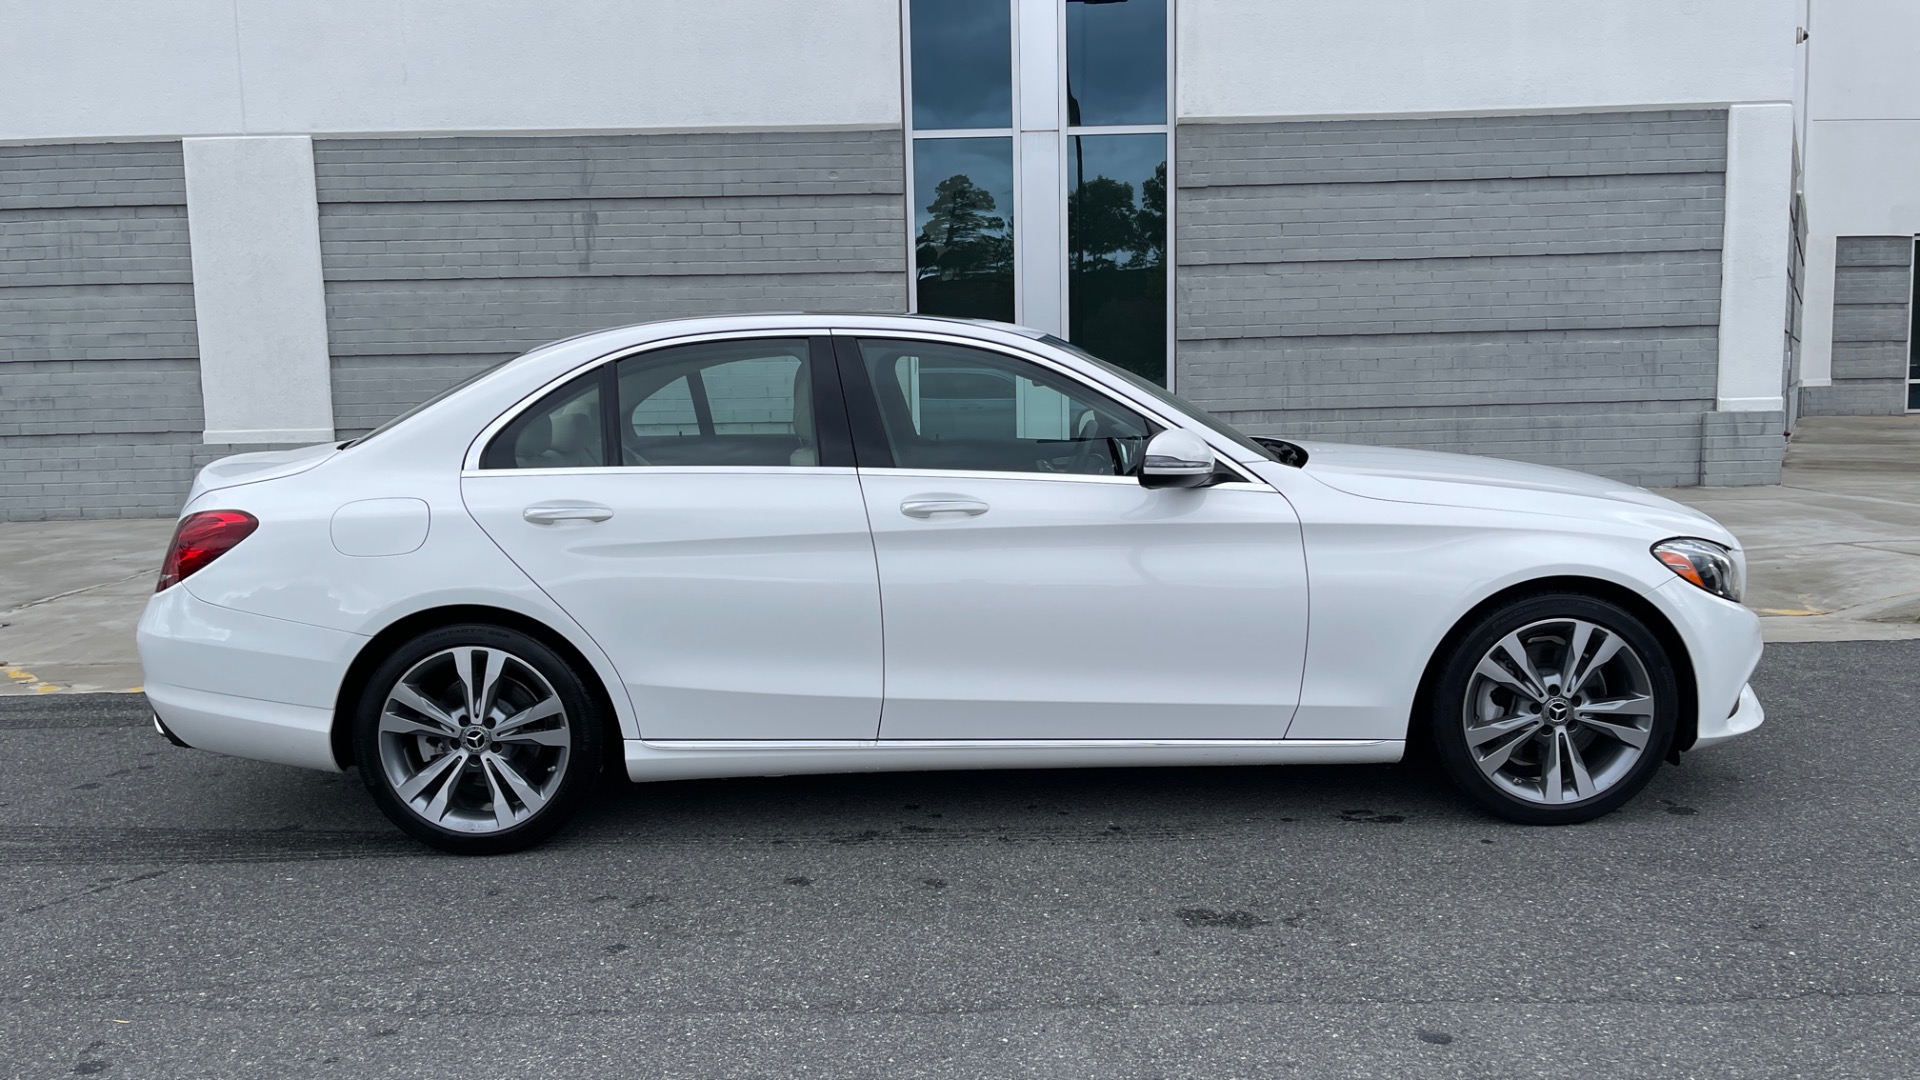 Used 2018 Mercedes-Benz C-Class C 300 / PREMIUM PACKAGE / 18IN WHEELS / HEATED FRONT SEATS / LED HEADLIGHTS for sale $27,495 at Formula Imports in Charlotte NC 28227 6